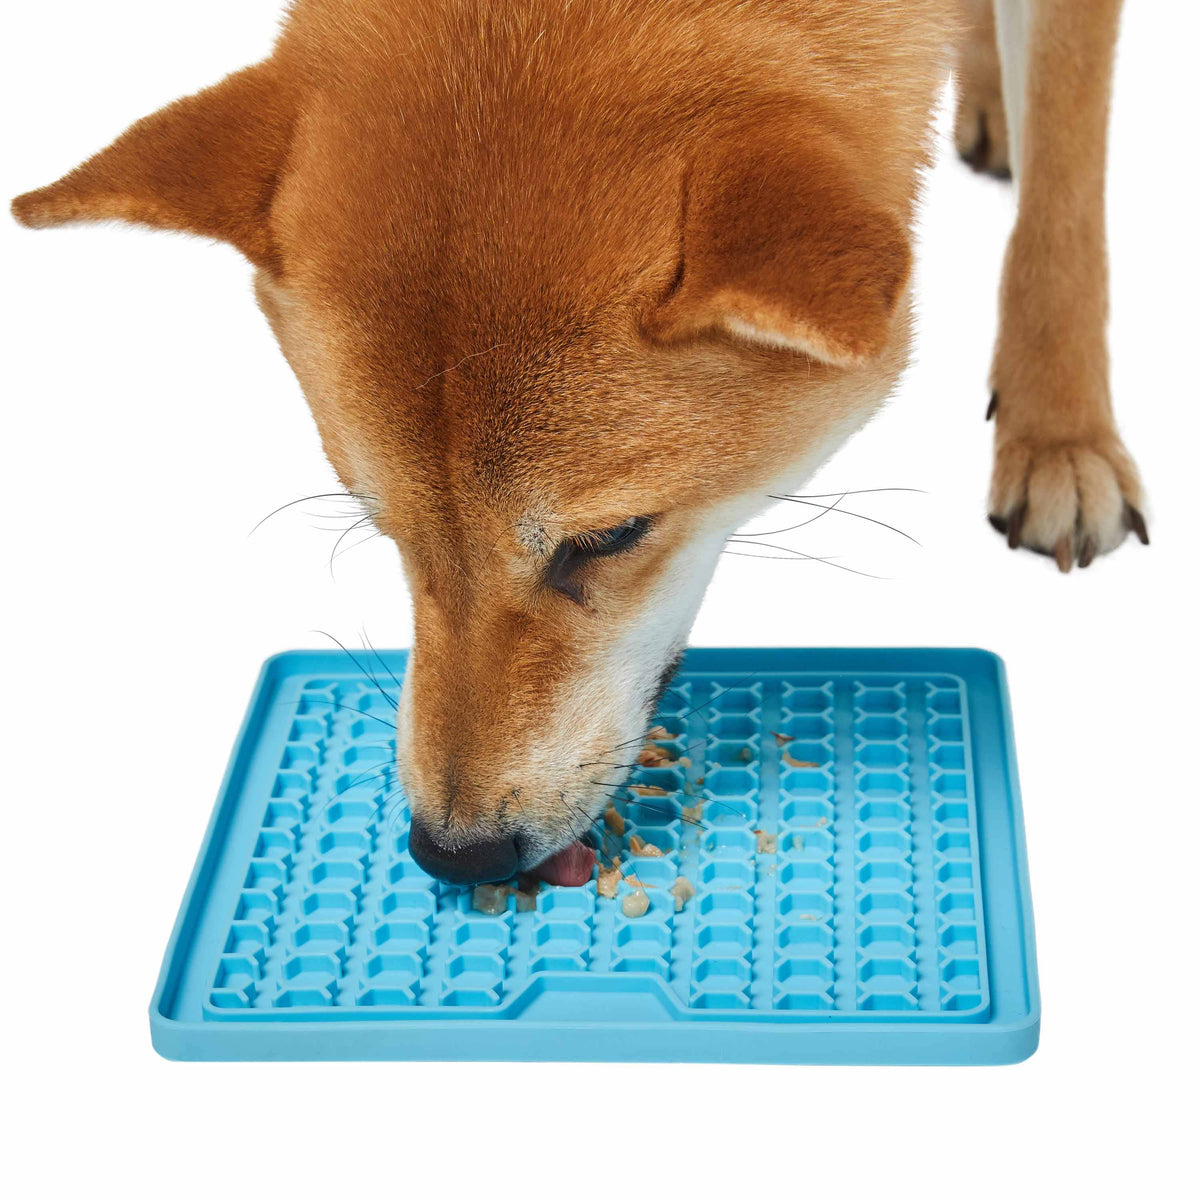 Why Are Lick Mats Good for Dogs?